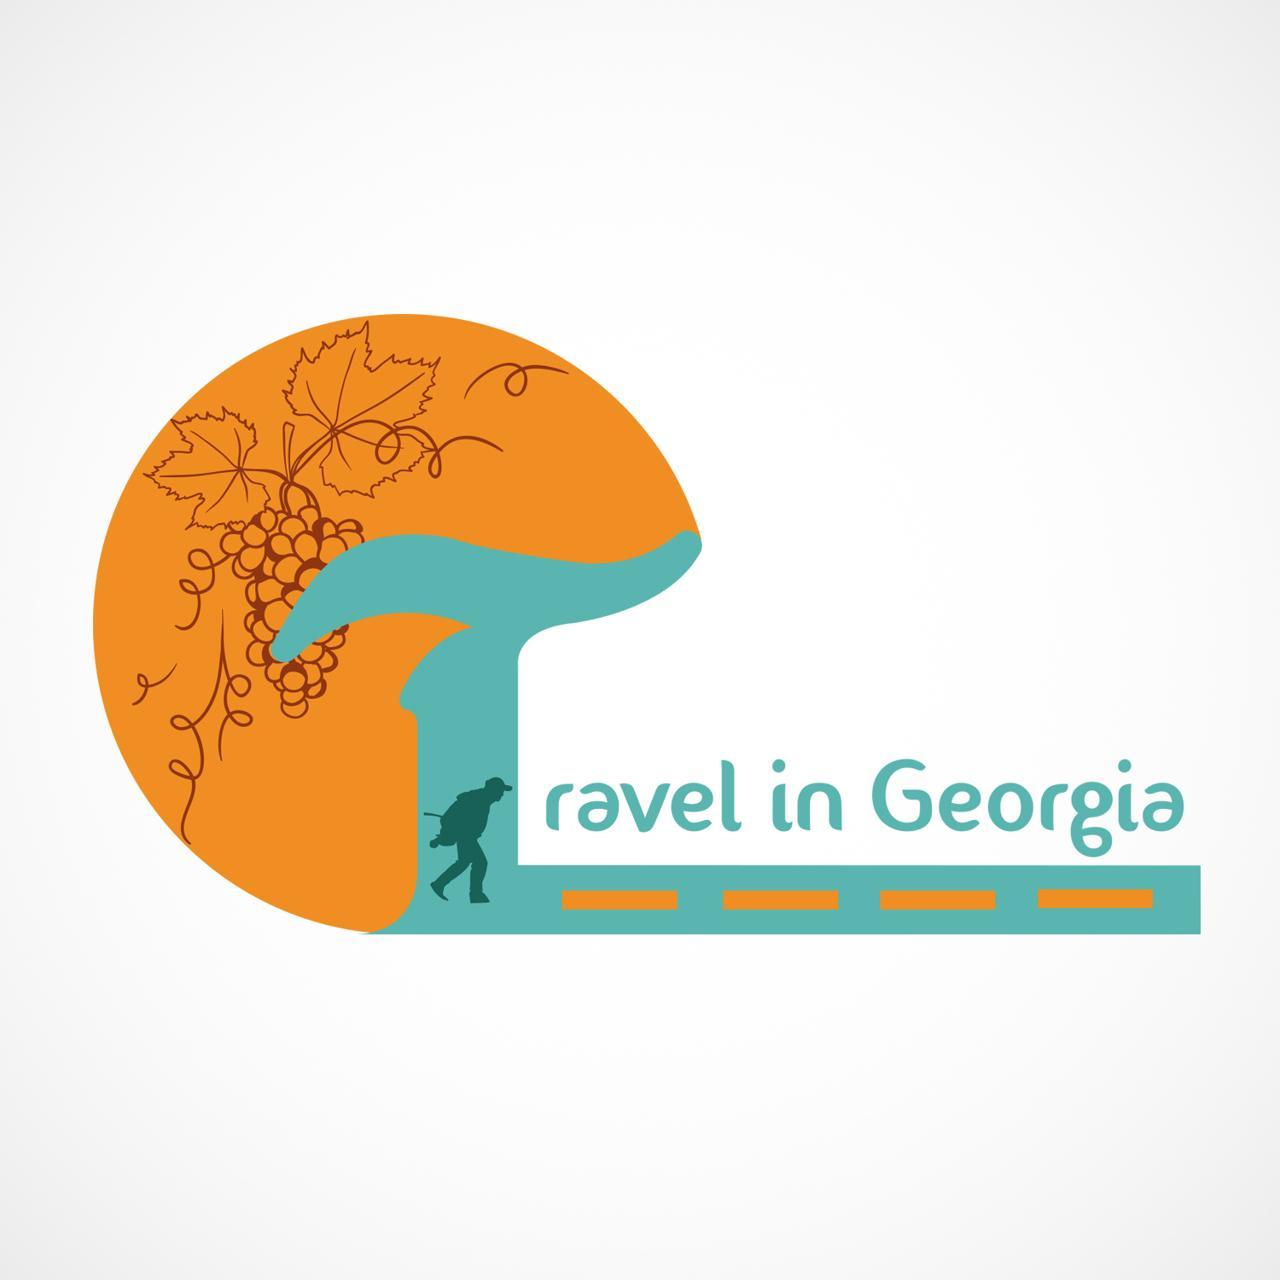 Travel information, About Georgia, Sights, Flights, Transfer, Hotels, Booking, Tours, Car rental, Guides.       BOOK YOUR TRAVEL